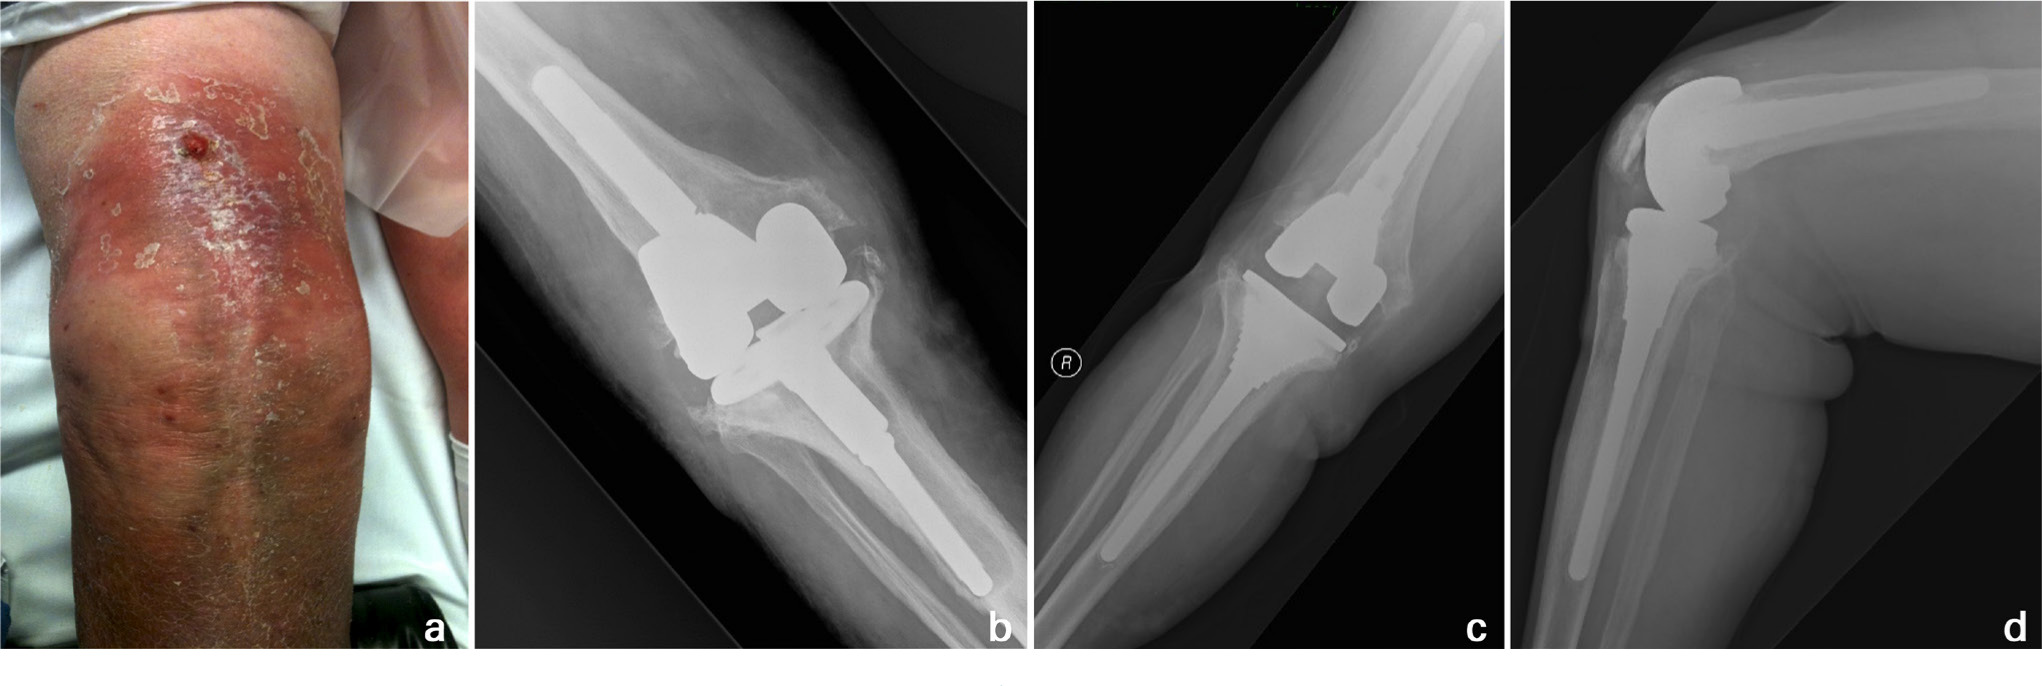 Fig. 2 
            a) Preoperative clinical photograph demonstrates a sinus in the line of a previous scar with surrounding erythema. b) The corresponding anteroposterior right knee radiograph shows extensive osteolysis around the underlying revision total knee arthroplasty prosthesis. This 78-year-old female underwent single-stage re-revision. Excision of the collateral ligaments was not required during the debridement in this particular case, and increased constraint was accordingly unnecessary. Stable zonal fixation with cementless components was achieved, as shown on c) anteroposterior and d) lateral right knee radiographs at three years postoperatively.
          